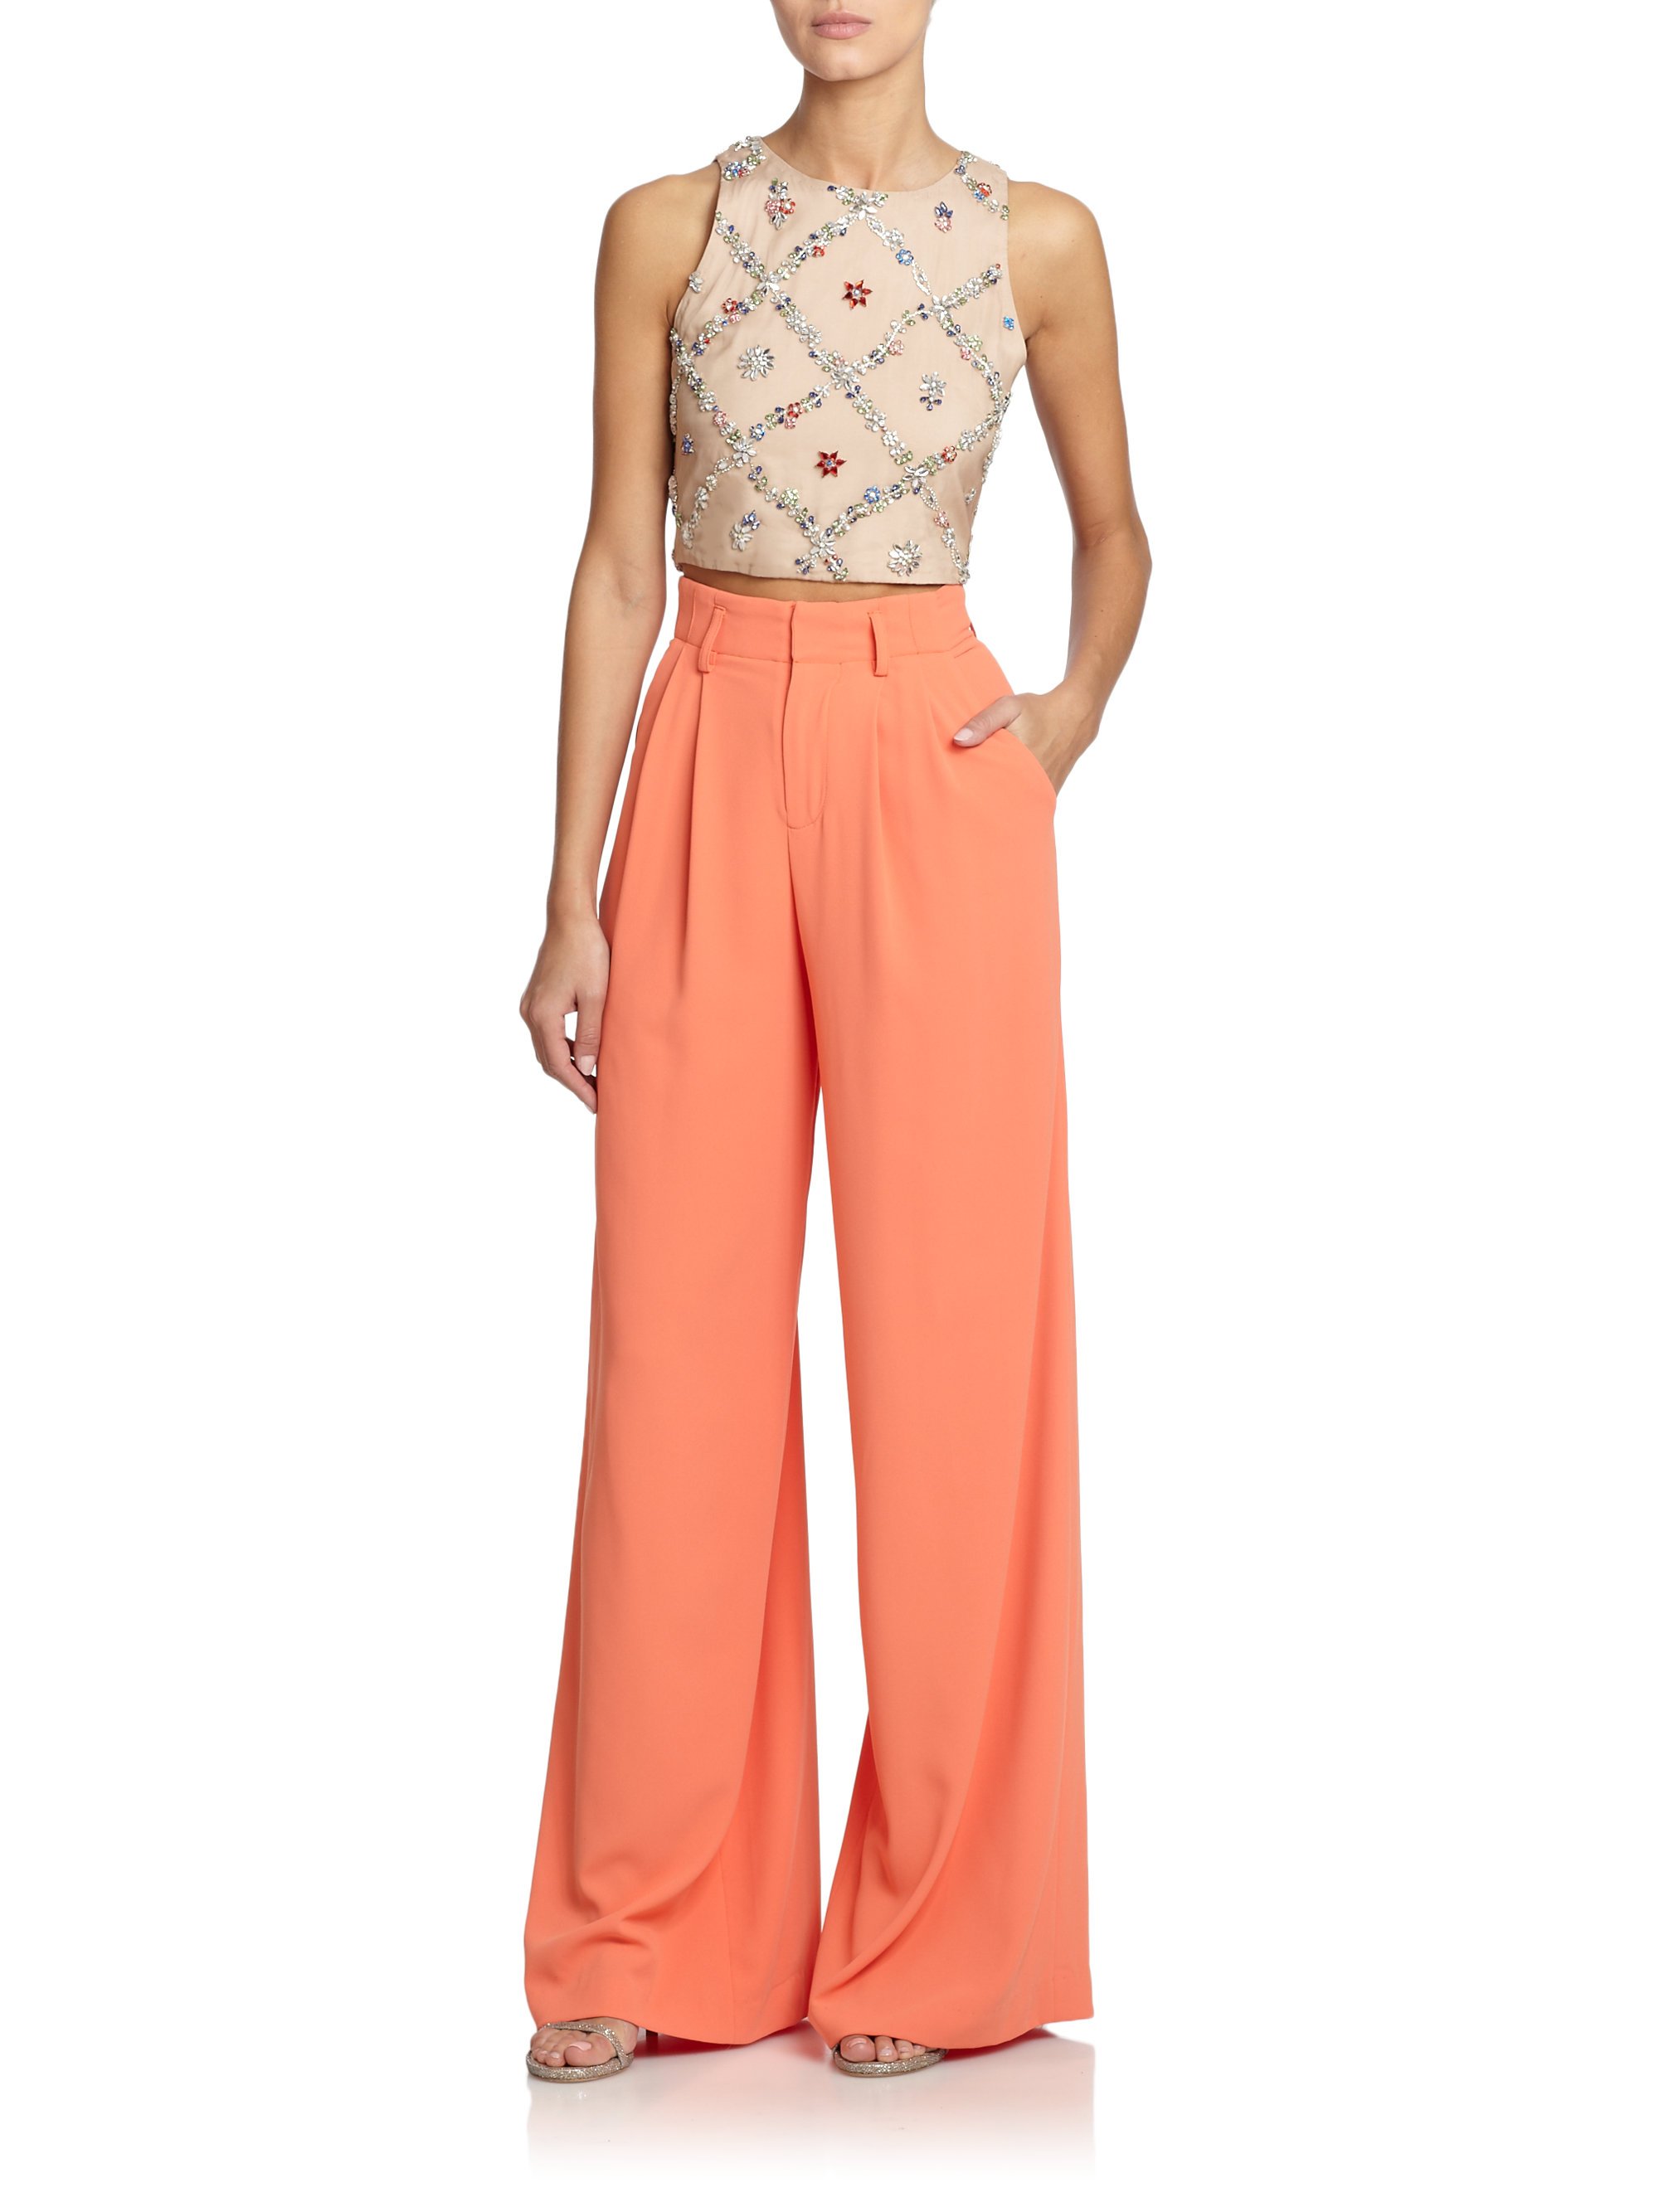 Lyst - Alice + Olivia High-Waisted Wide-Leg Pants in Pink